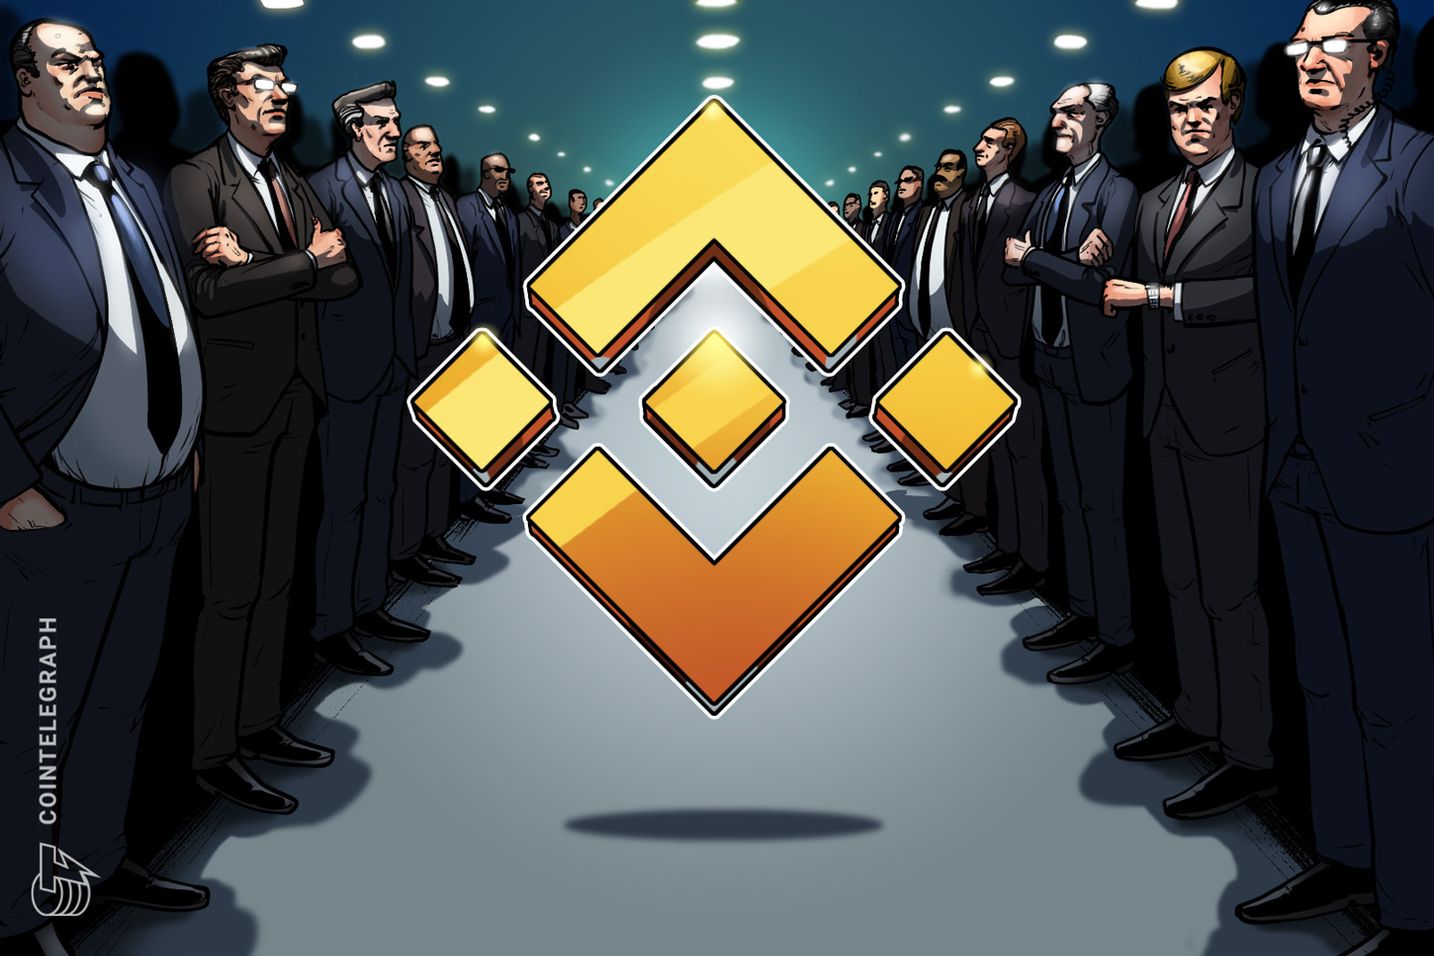 Binance says 'no comment' on report it mulled closing U.S. arm to protect its global firm